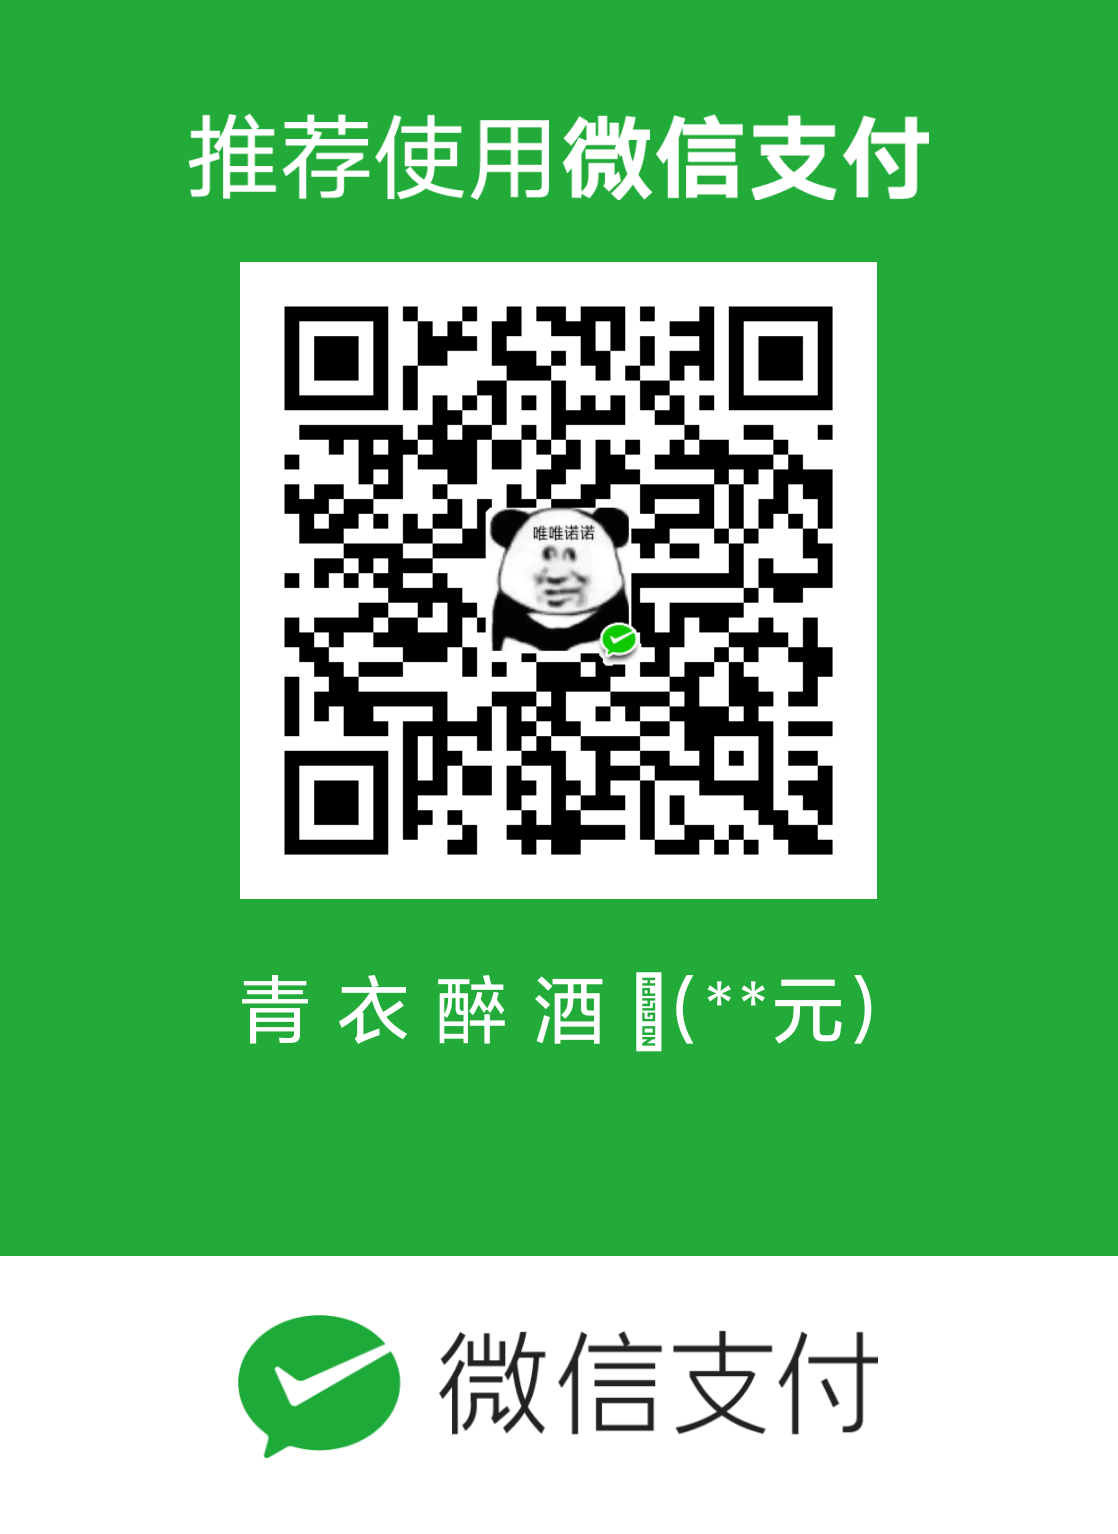 mm_facetoface_collect_qrcode_1632144574828.png